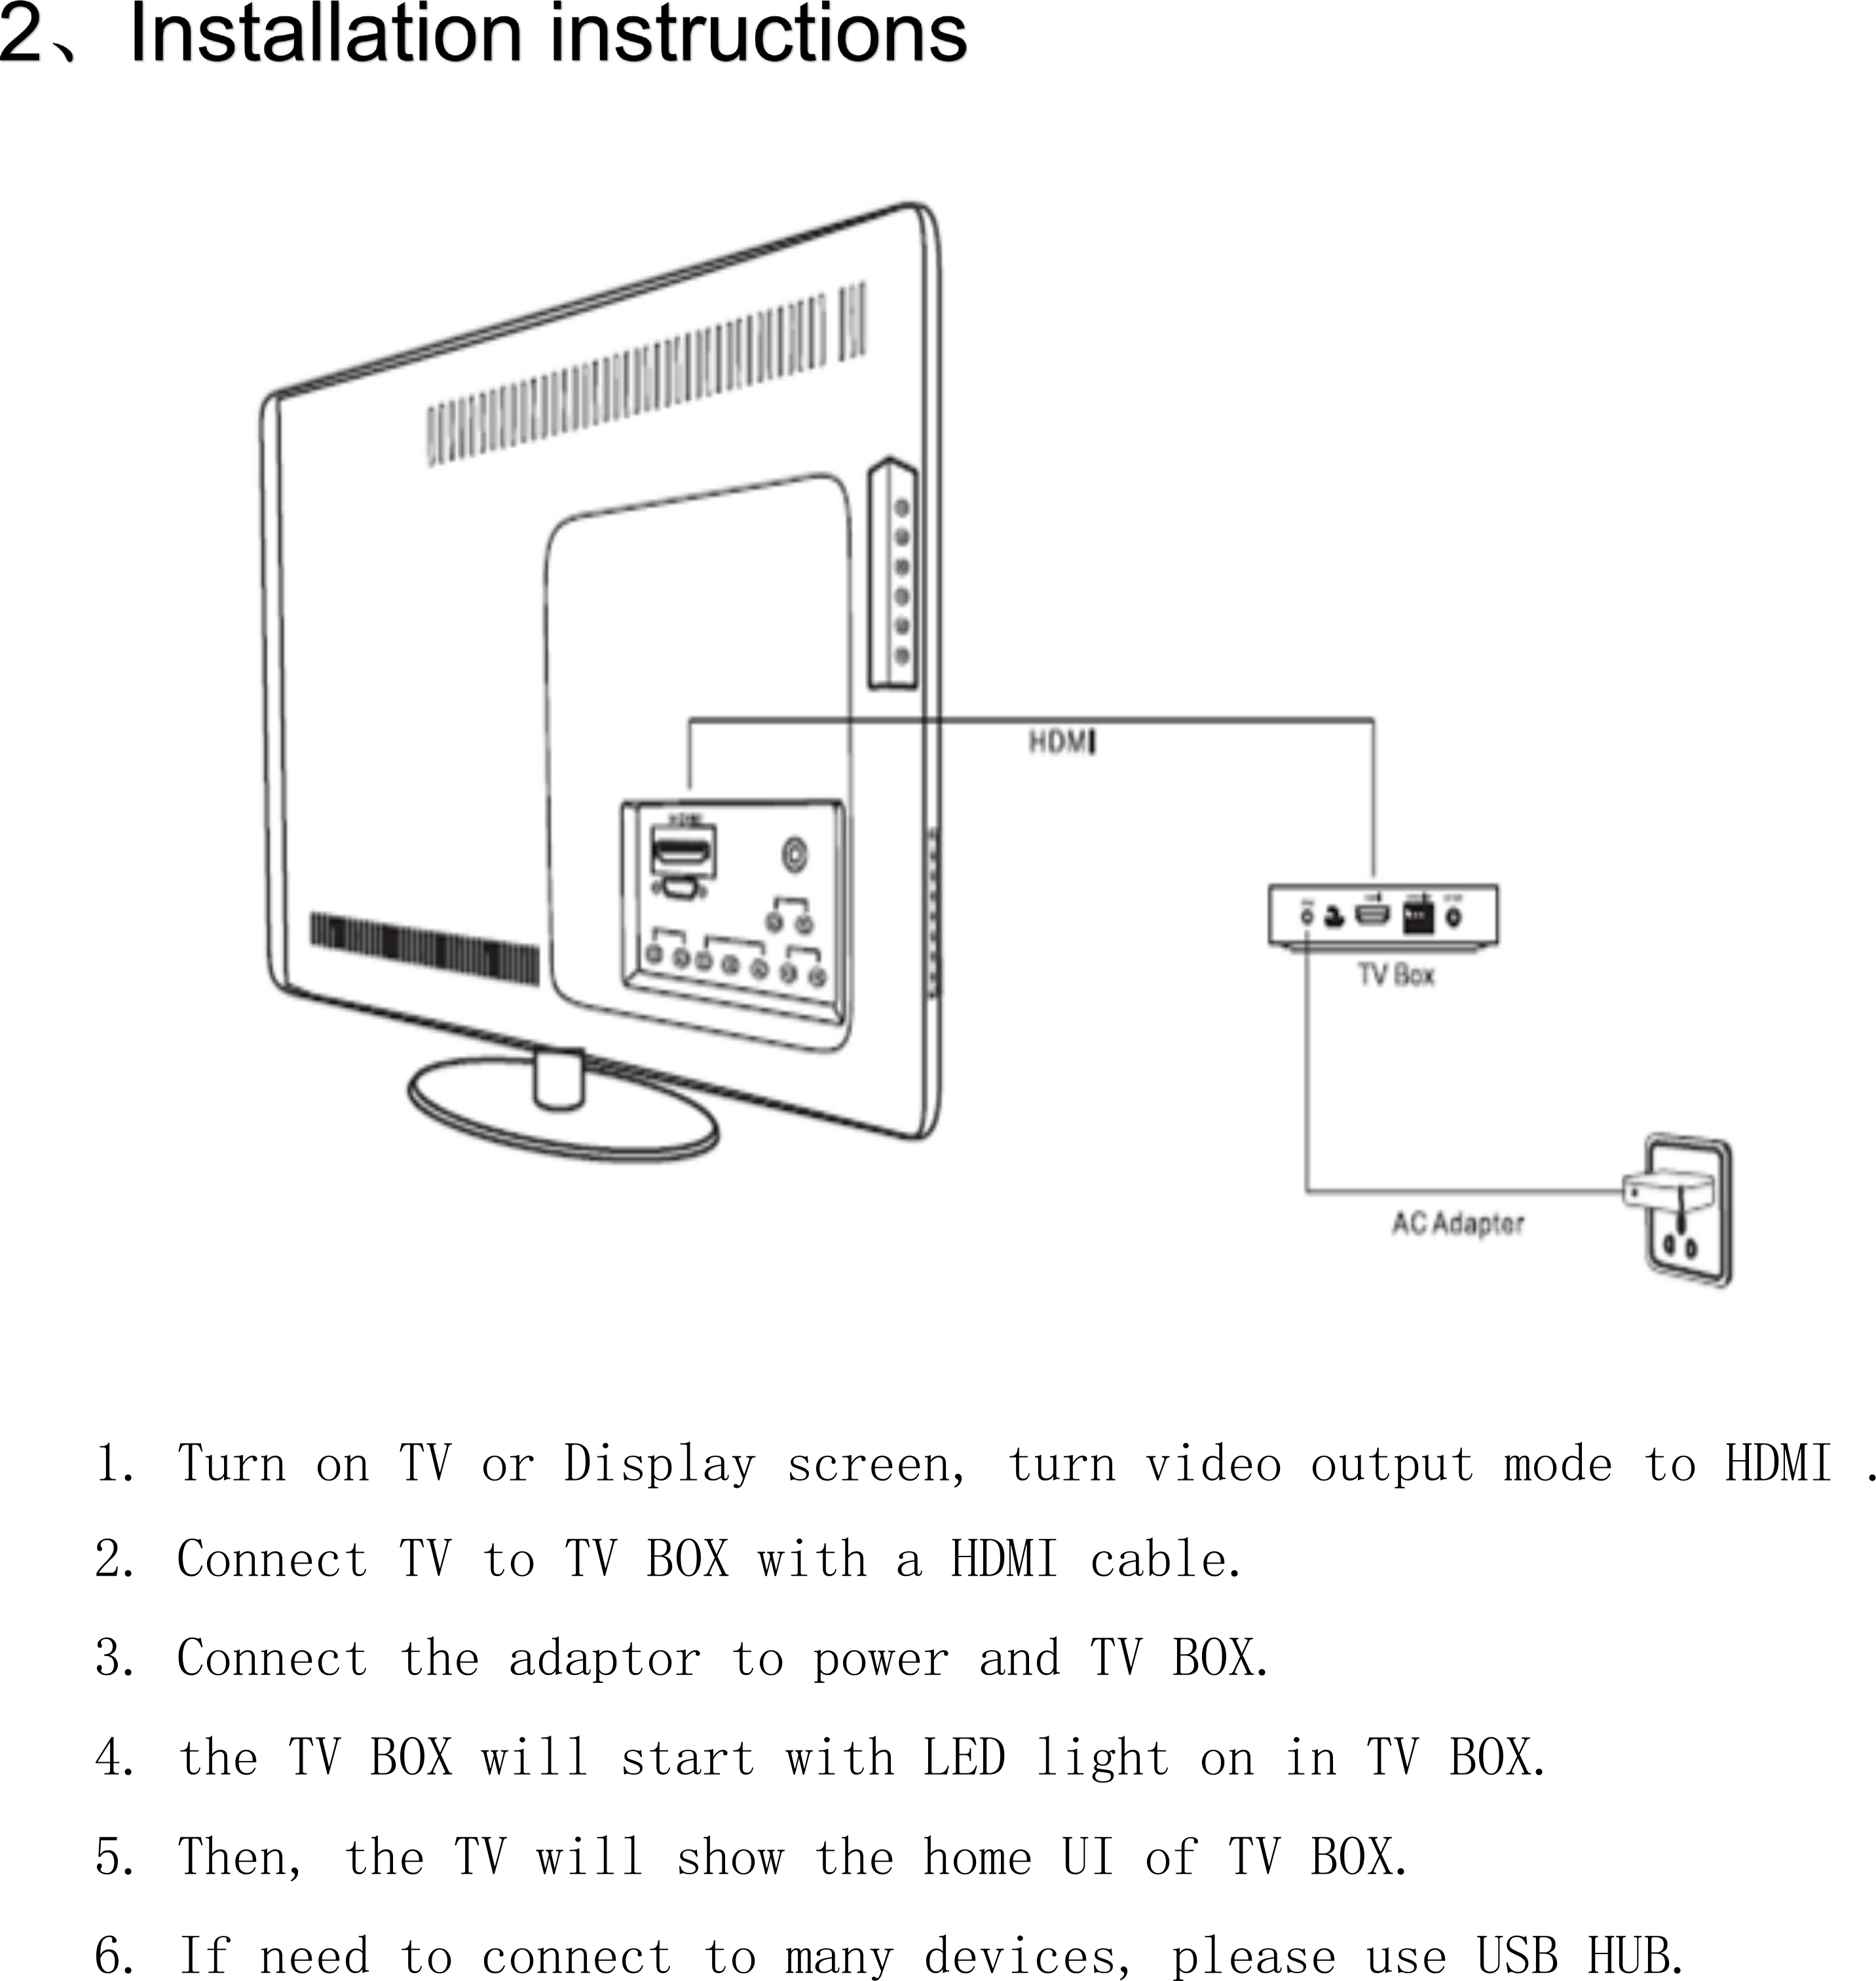      1. Turn on TV or Display screen, turn video output mode to HDMI . 2. Connect TV to TV BOX with a HDMI cable. 3. Connect the adaptor to power and TV BOX. 4. the TV BOX will start with LED light on in TV BOX. 5. Then, the TV will show the home UI of TV BOX. 6. If need to connect to many devices, please use USB HUB. 